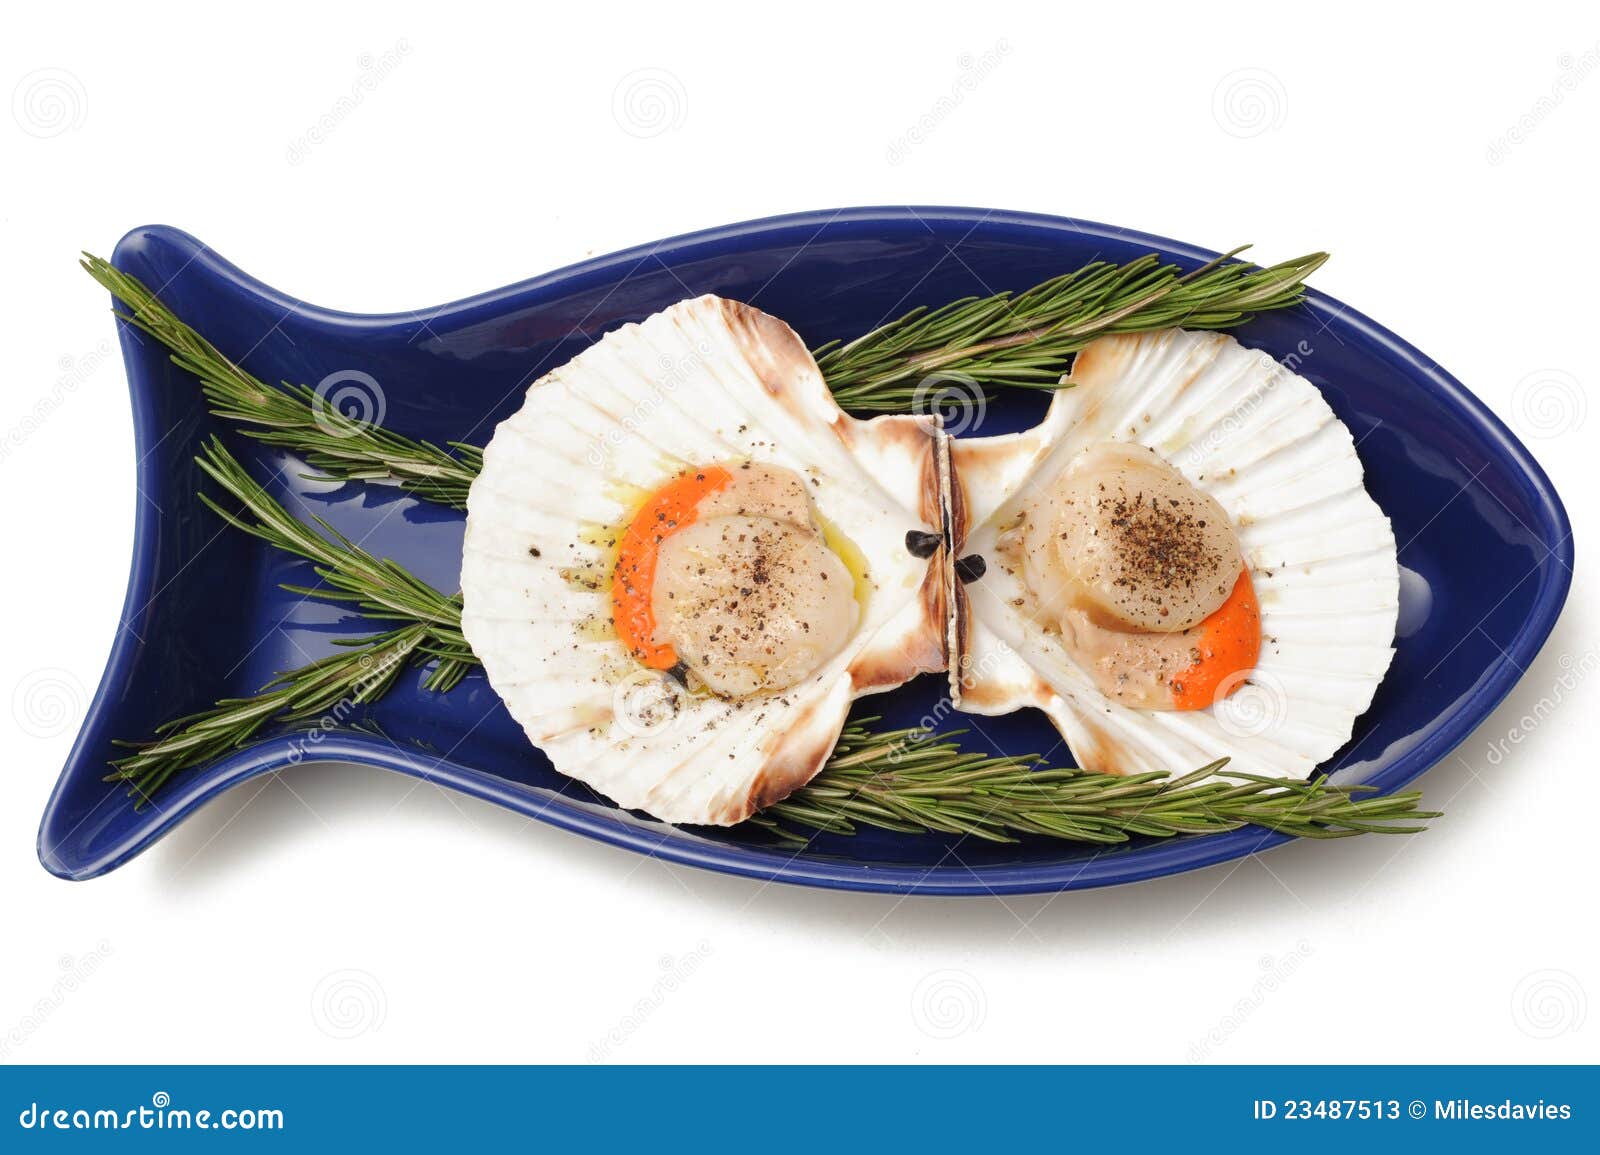 Scollops in a Fish Shaped Bowl Stock Image - Image of scallops, studio ...